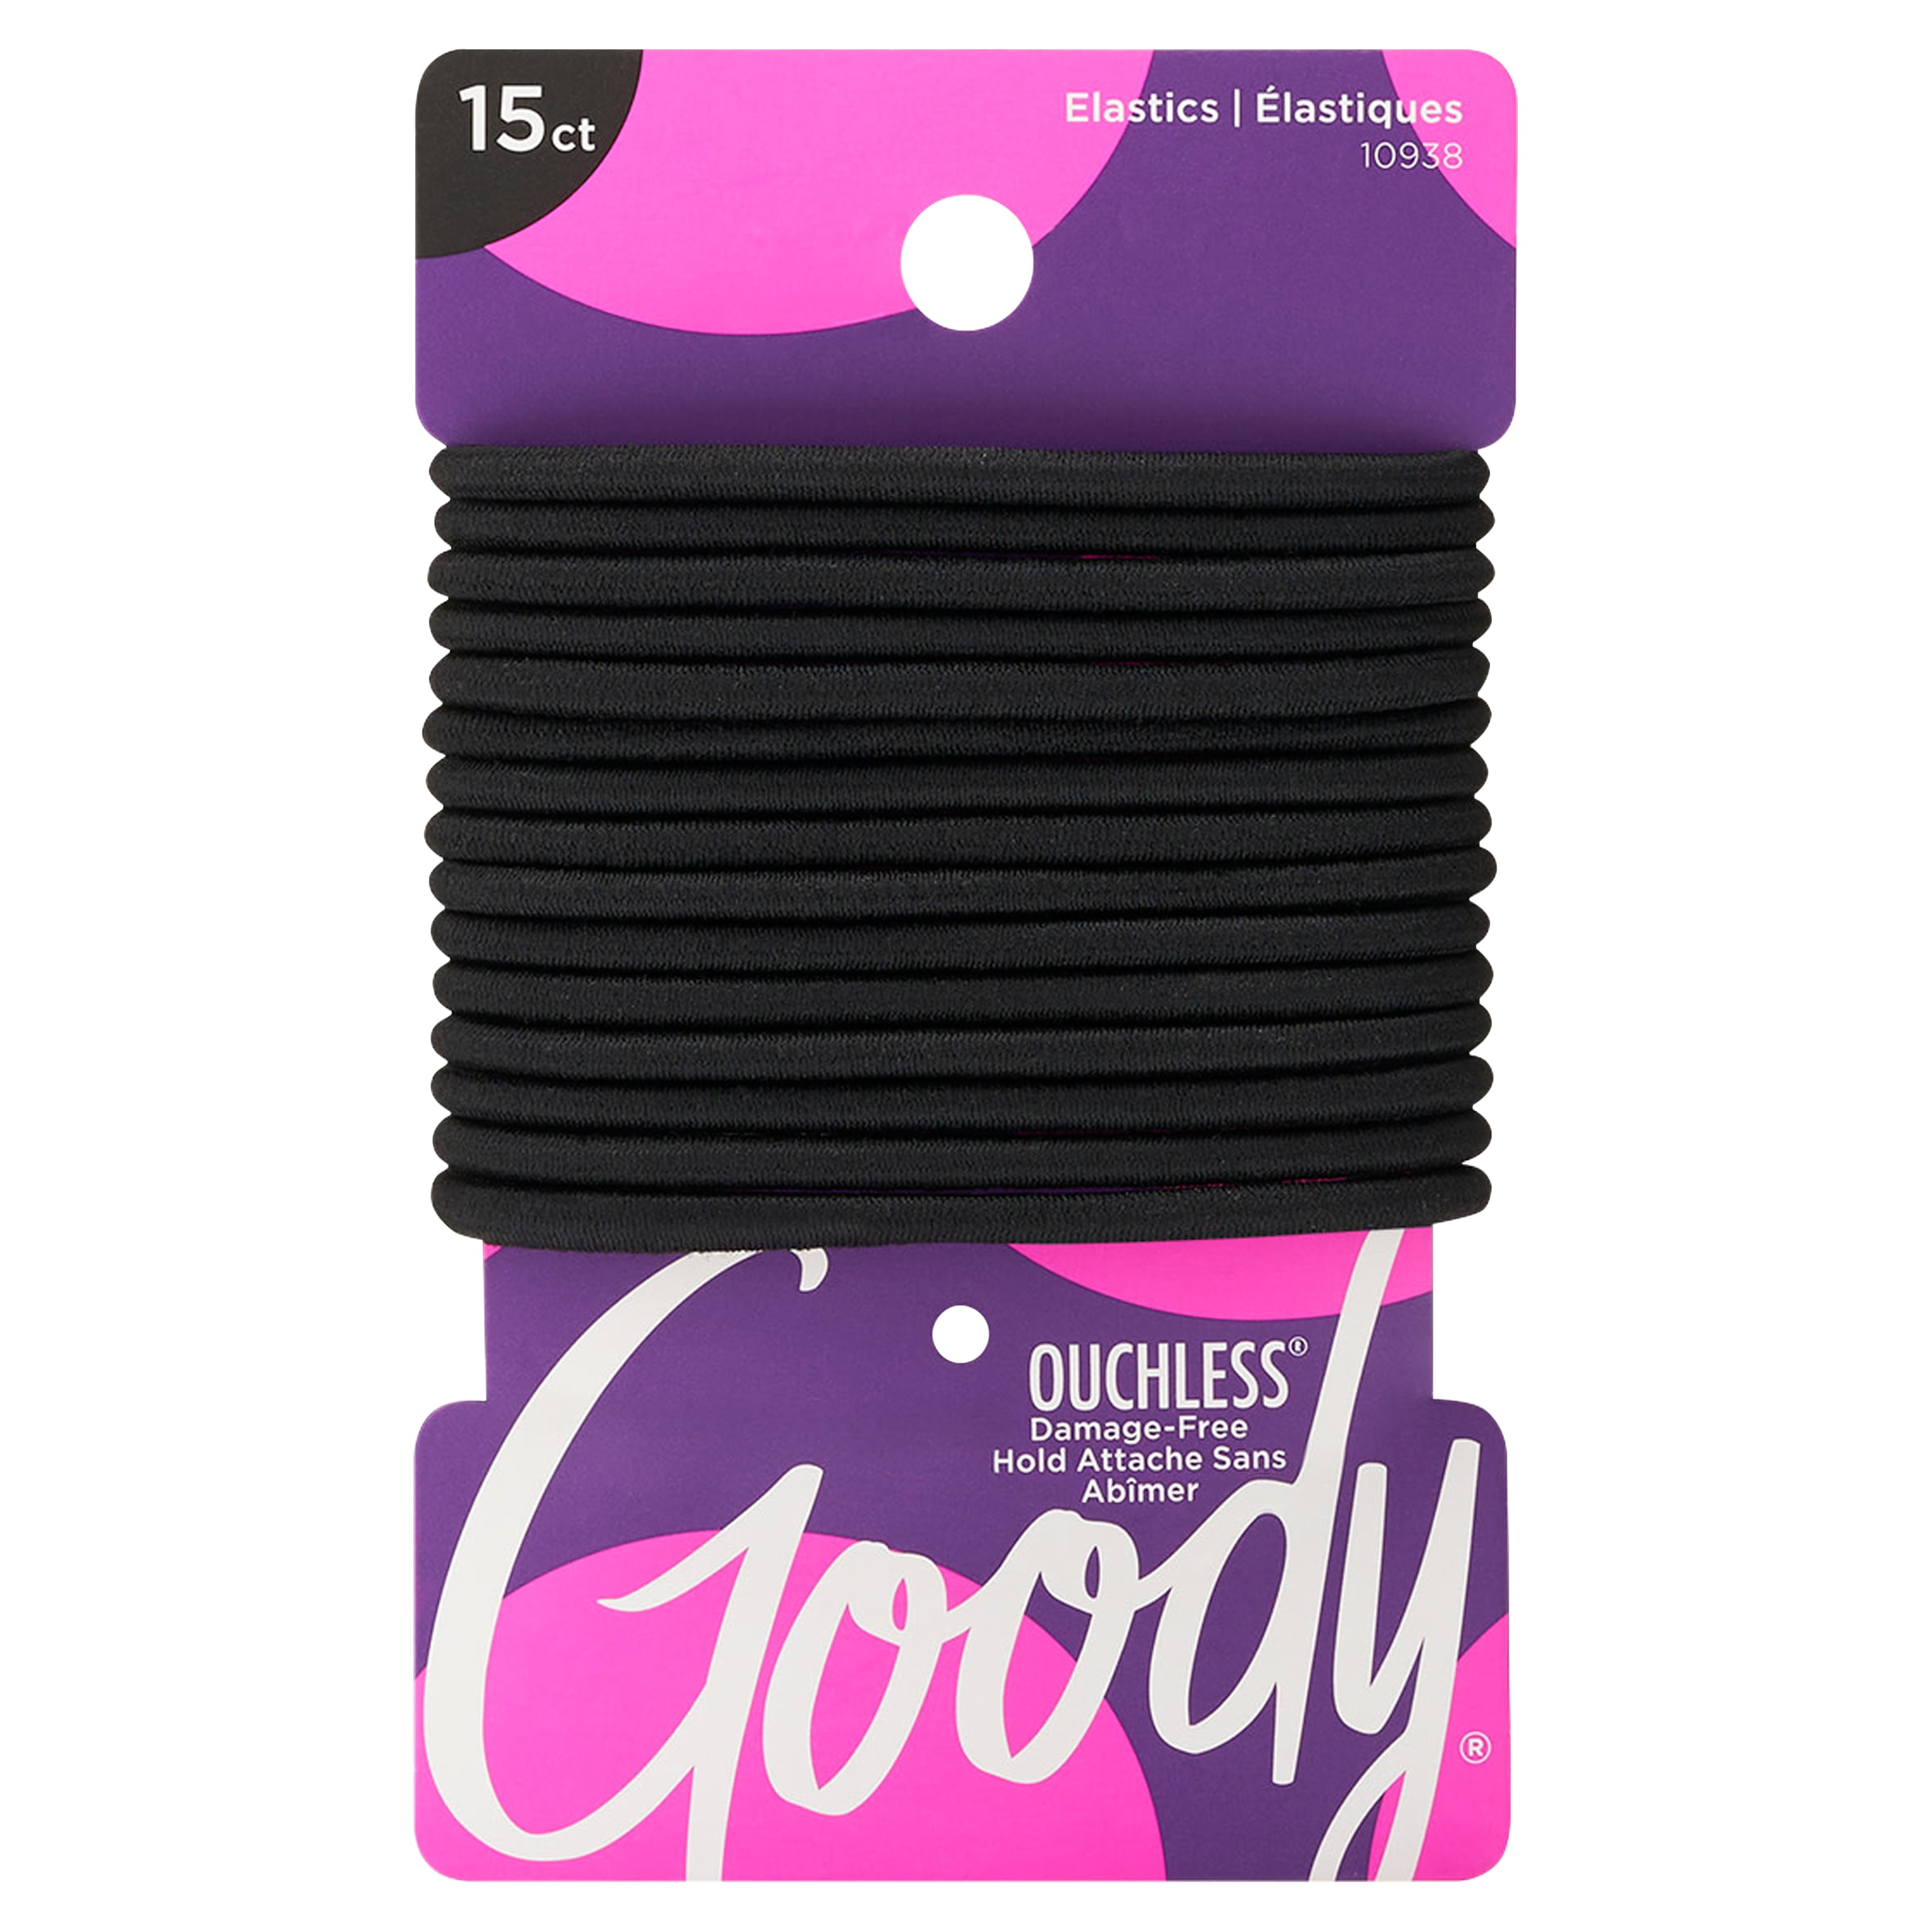 GOODY OUCHLESS No Metal Hair Ties Elastics Pony Tail 21 Count Black